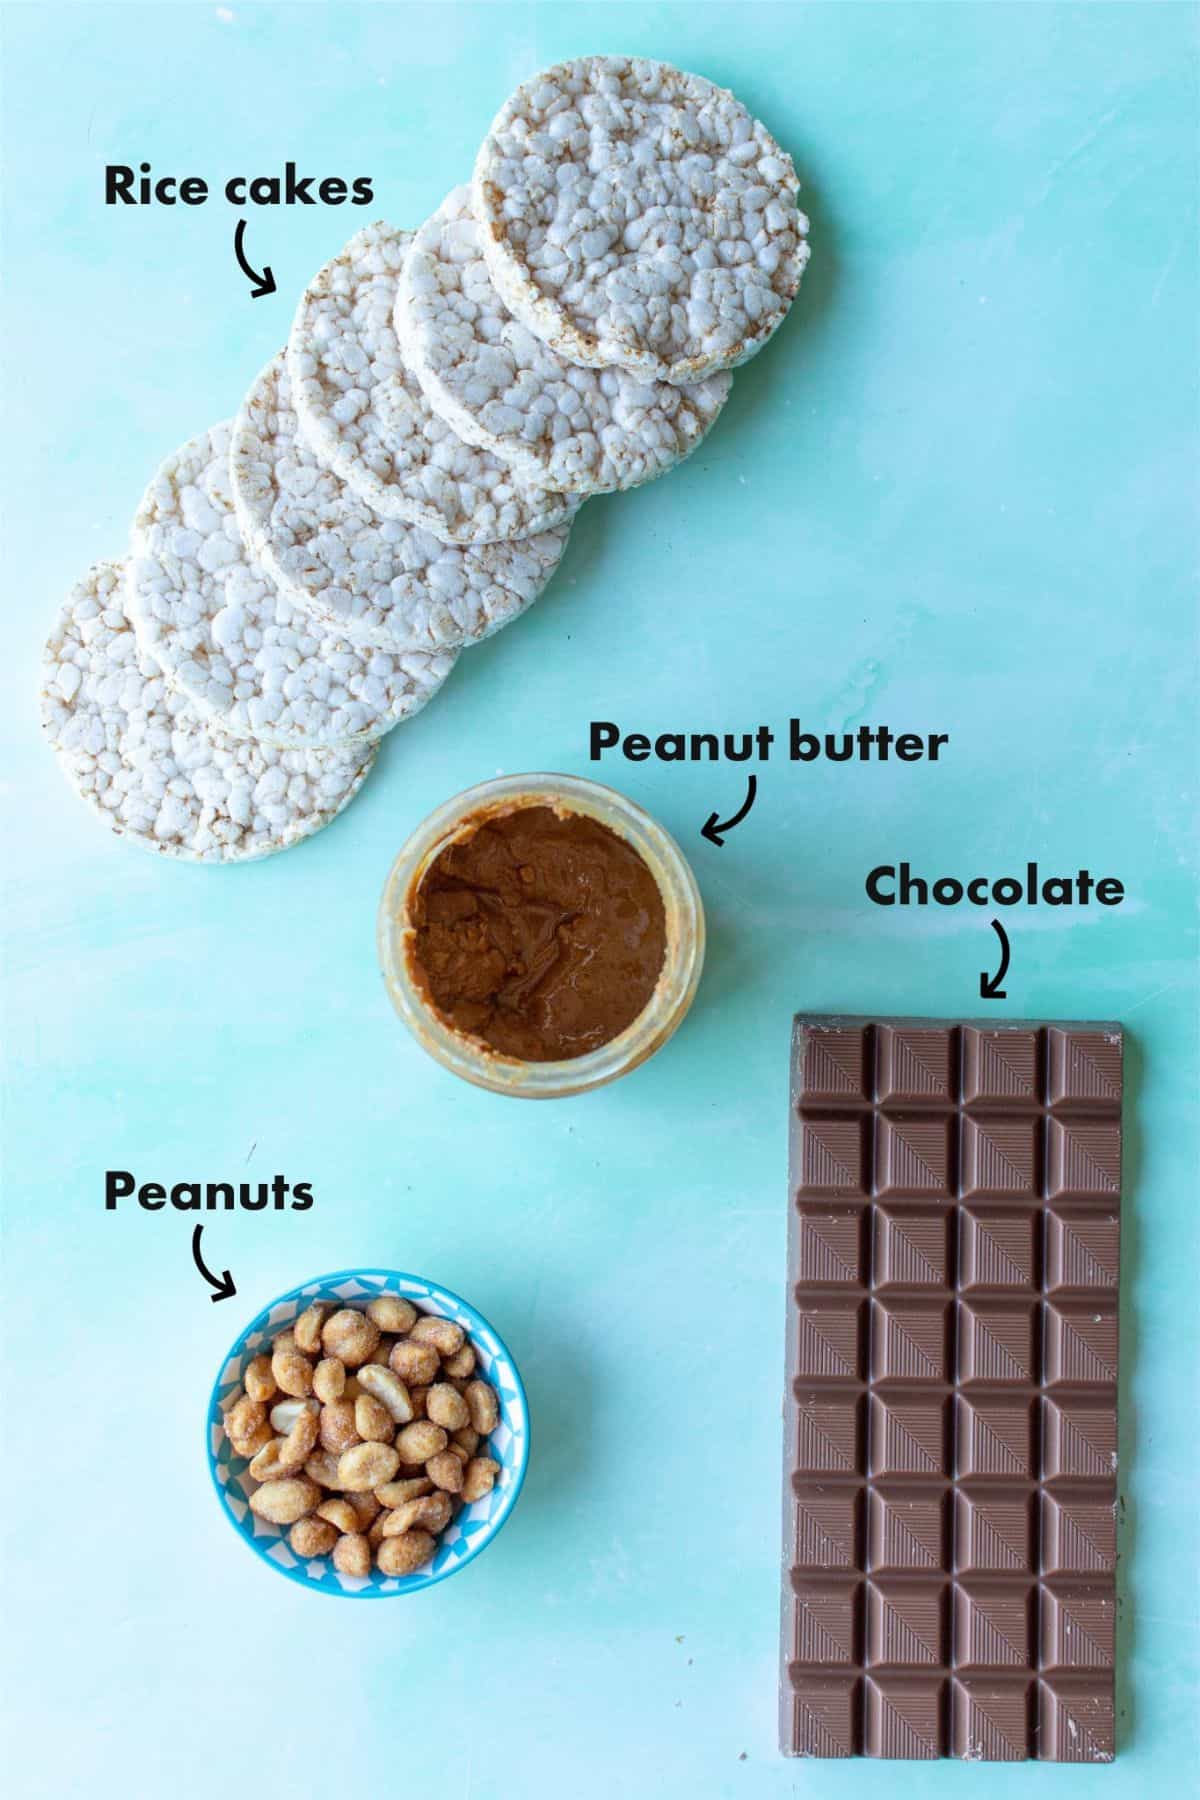 Ingredients to make the rice cakes with chocolate and peanut butter, and peanuts laid out on a pale blue back ground and labelled.